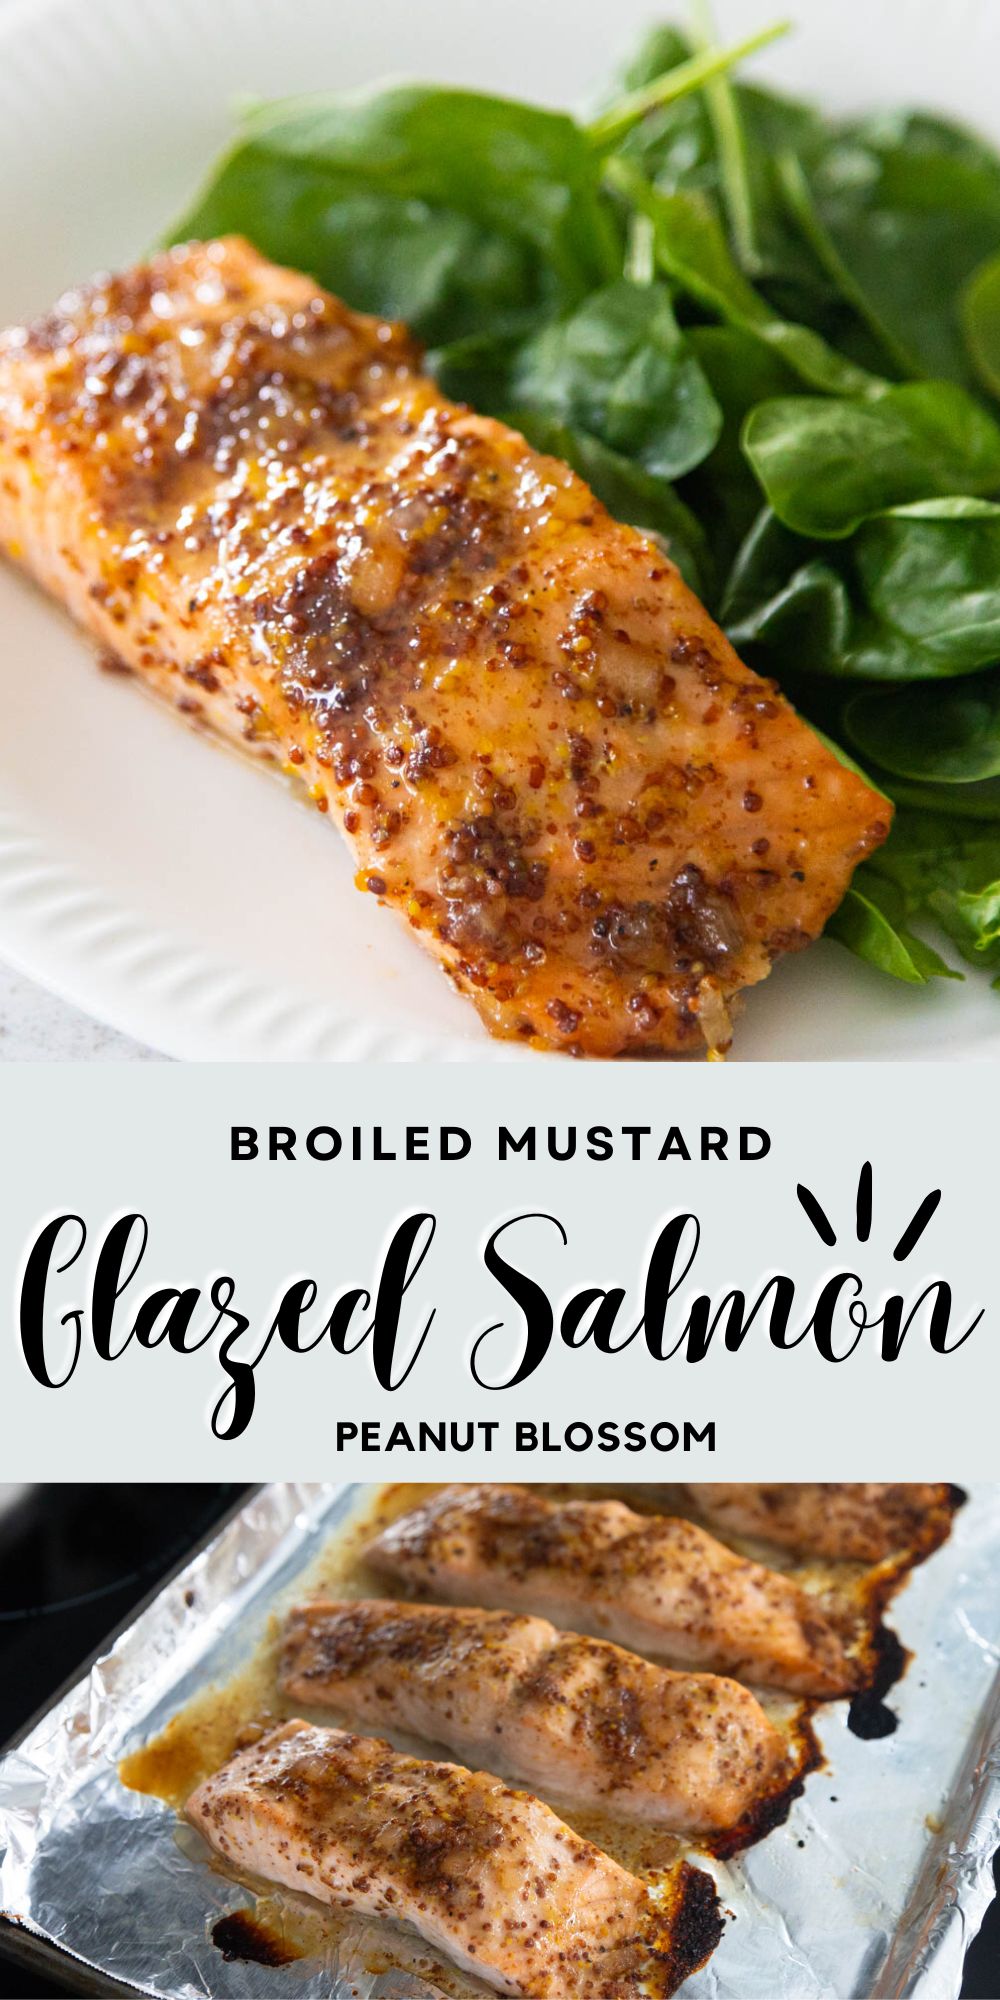 The photo collage shows the glazed salmon on the dinner plate next to baby spinach next to a photo of the salmon filets fresh from the broiler cooling on the stovetop.